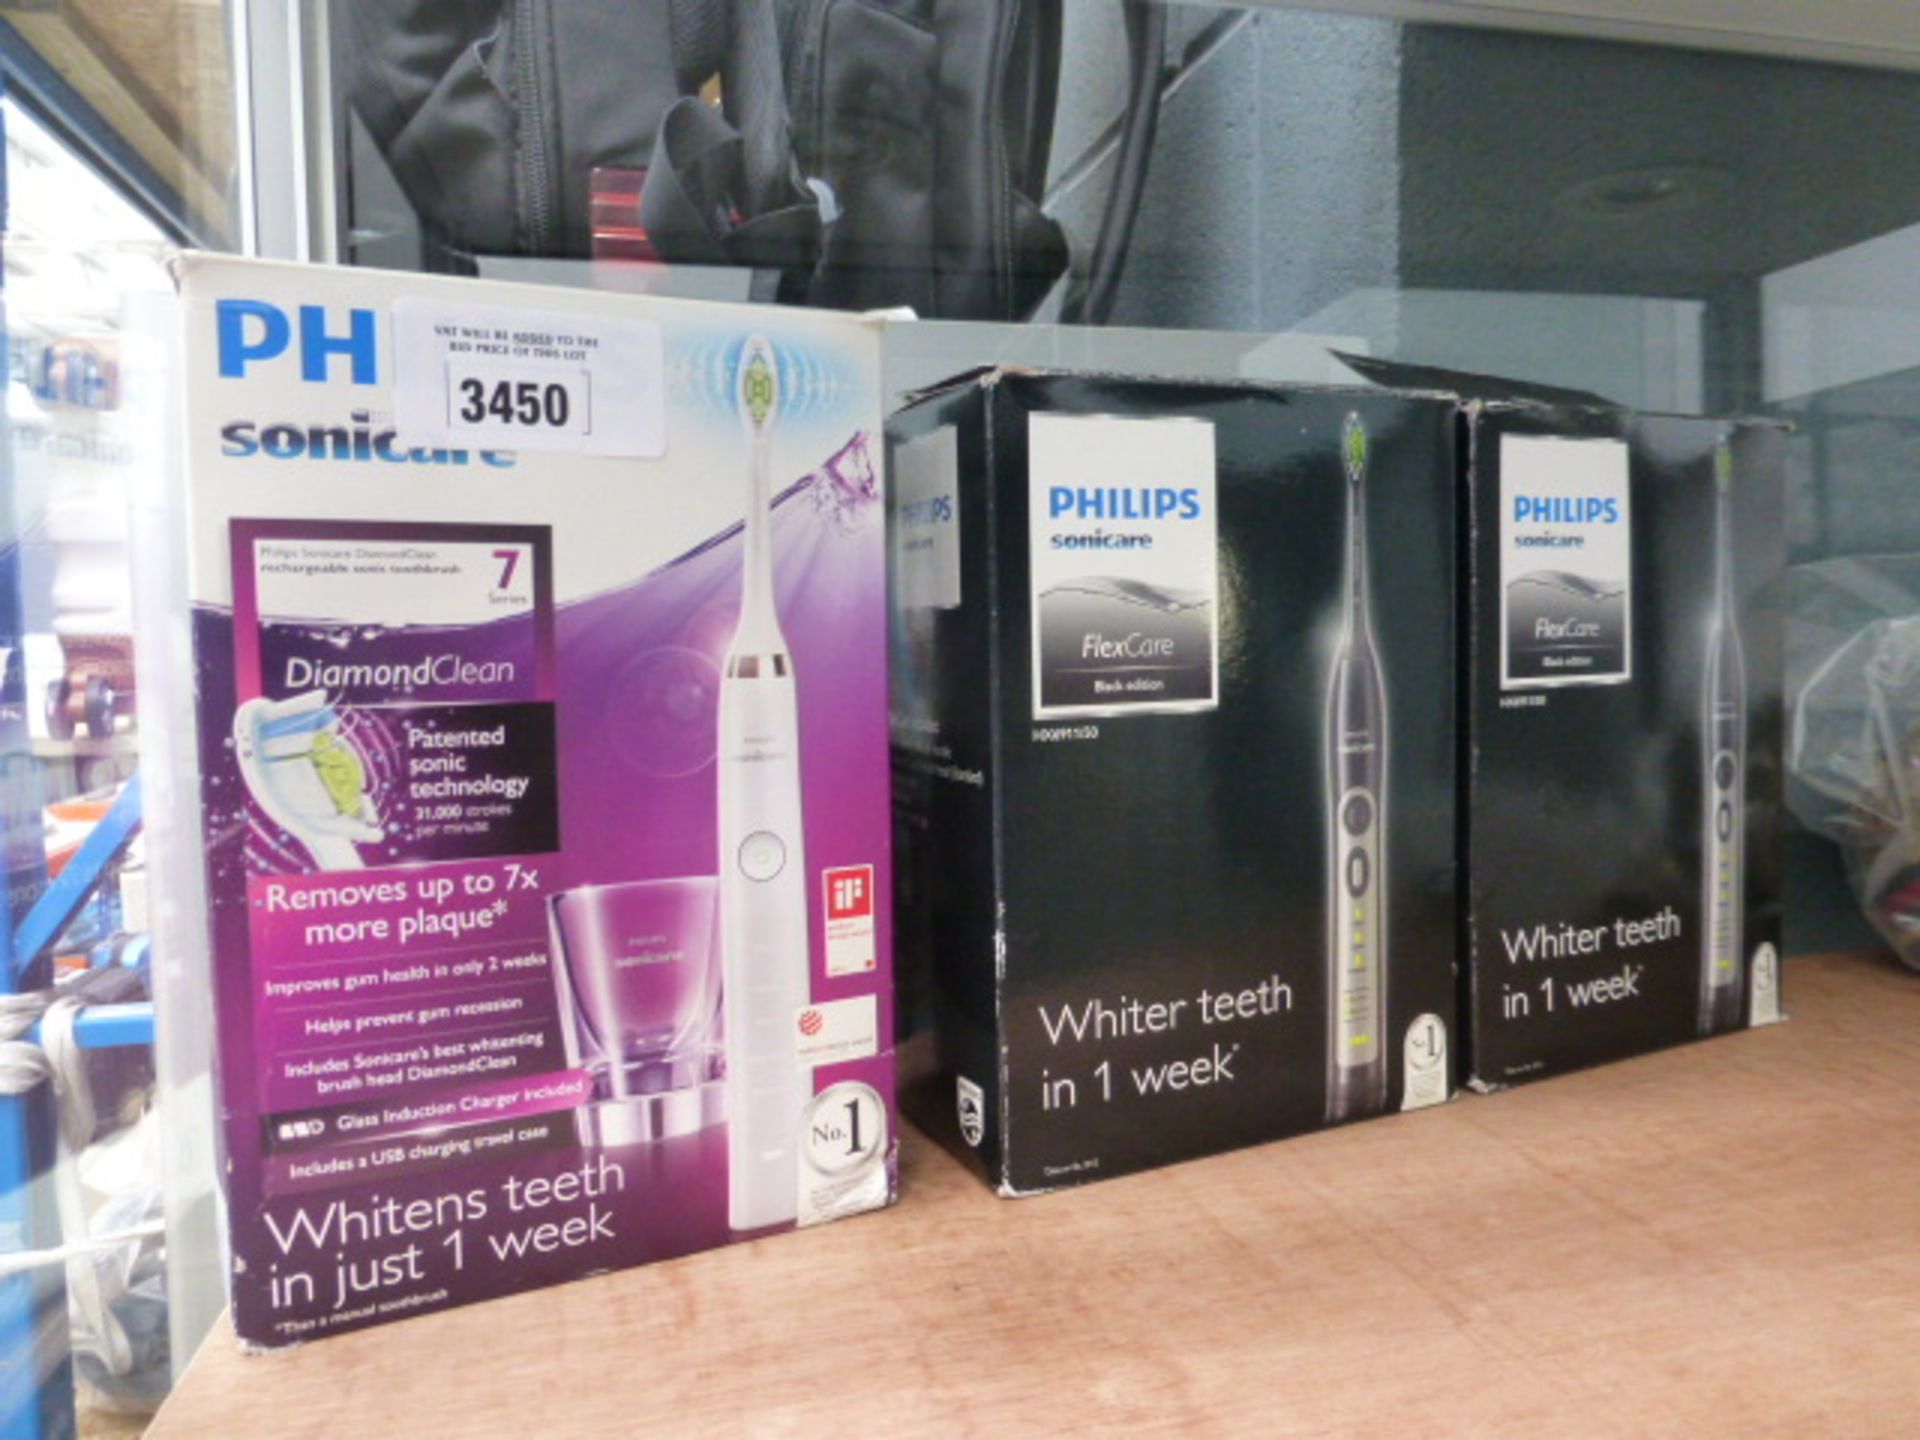 3 Phillps soni-care electric tooth brushes